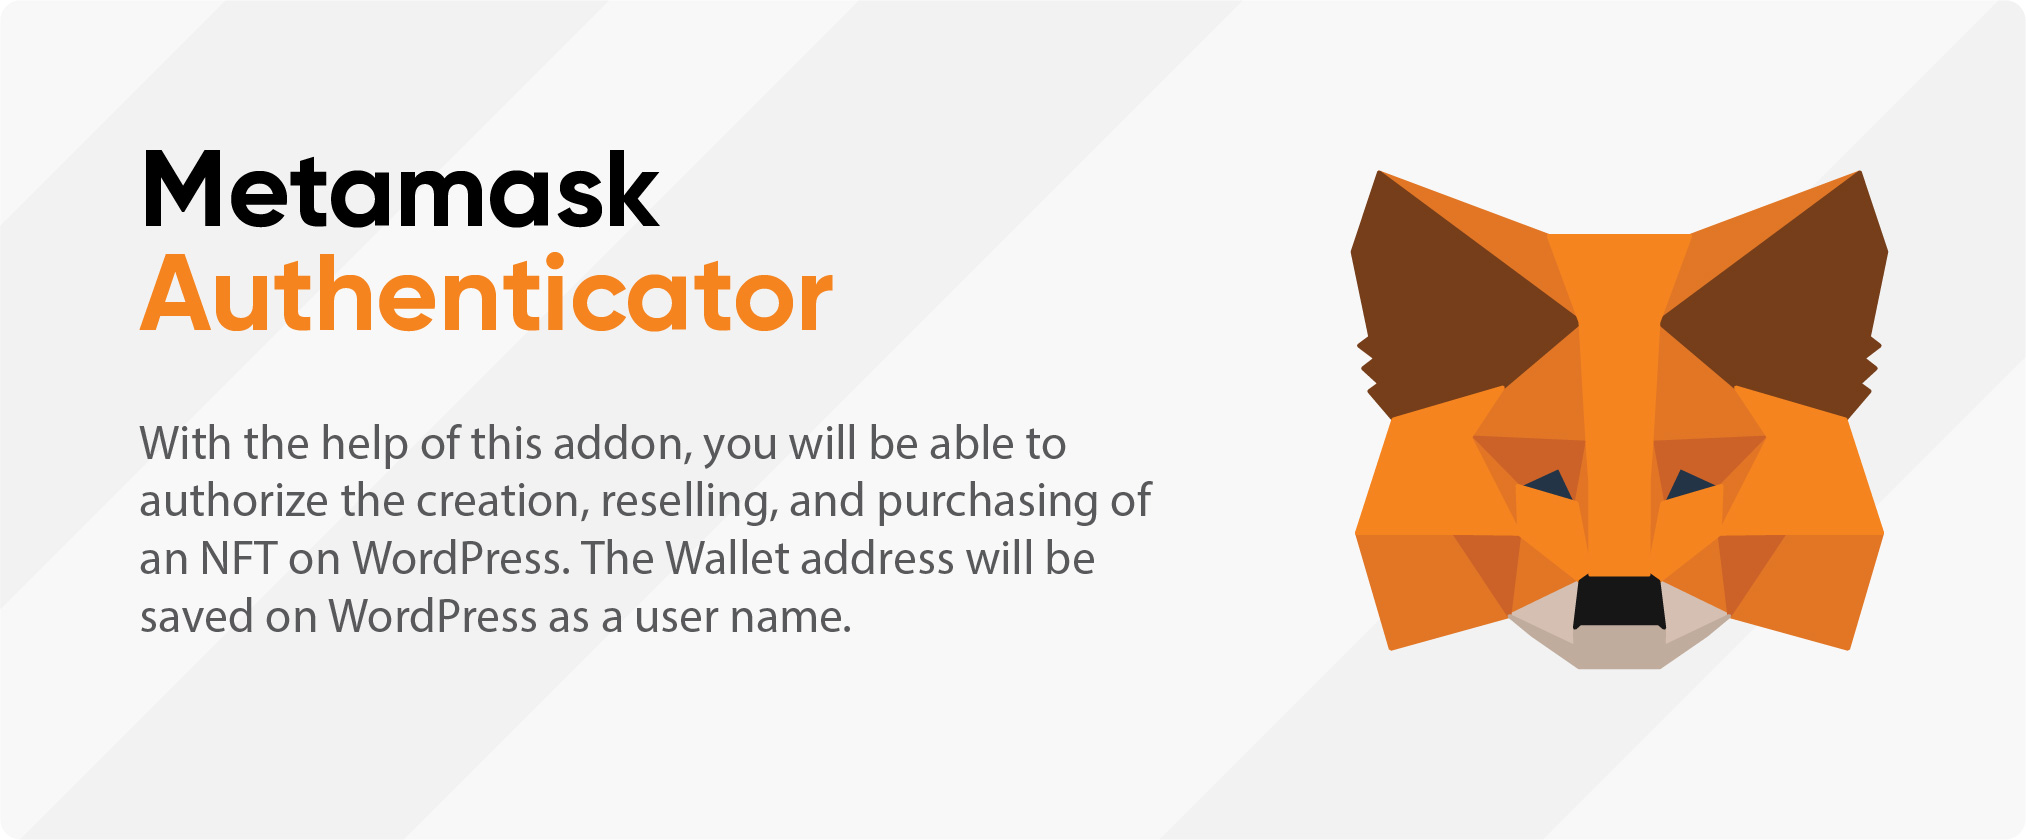 MetaMask Authenticator With the help of this addon, you will be able to authorize the creation, reselling, and purchasing of an NFT on WordPress. The Wallet address will be saved on WordPress as a user name.